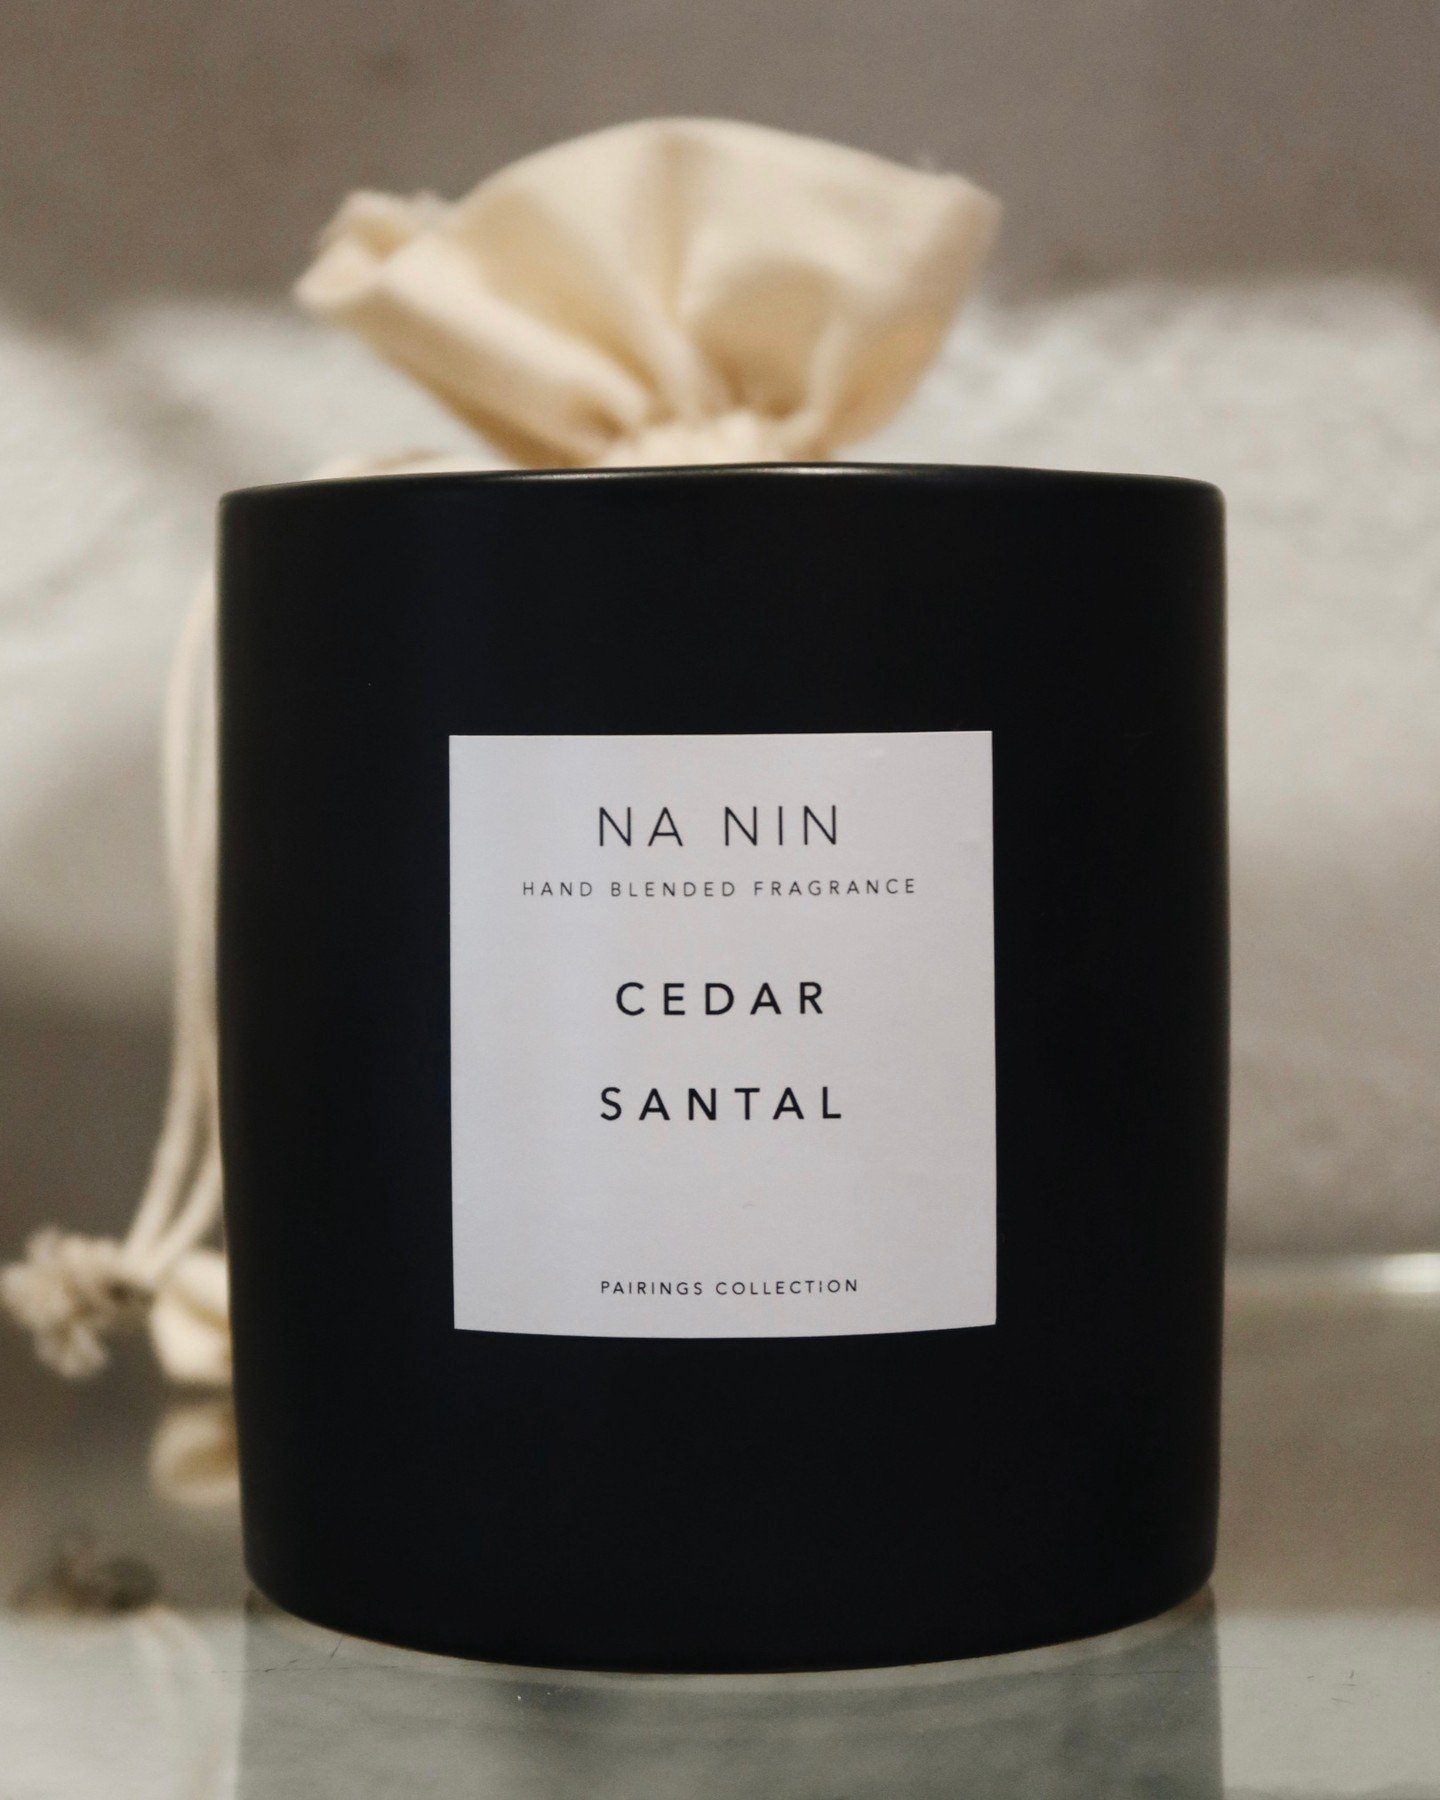 Cedar + Santal Soy Wax Candle from @naninstudio - shop this scent and more in store.